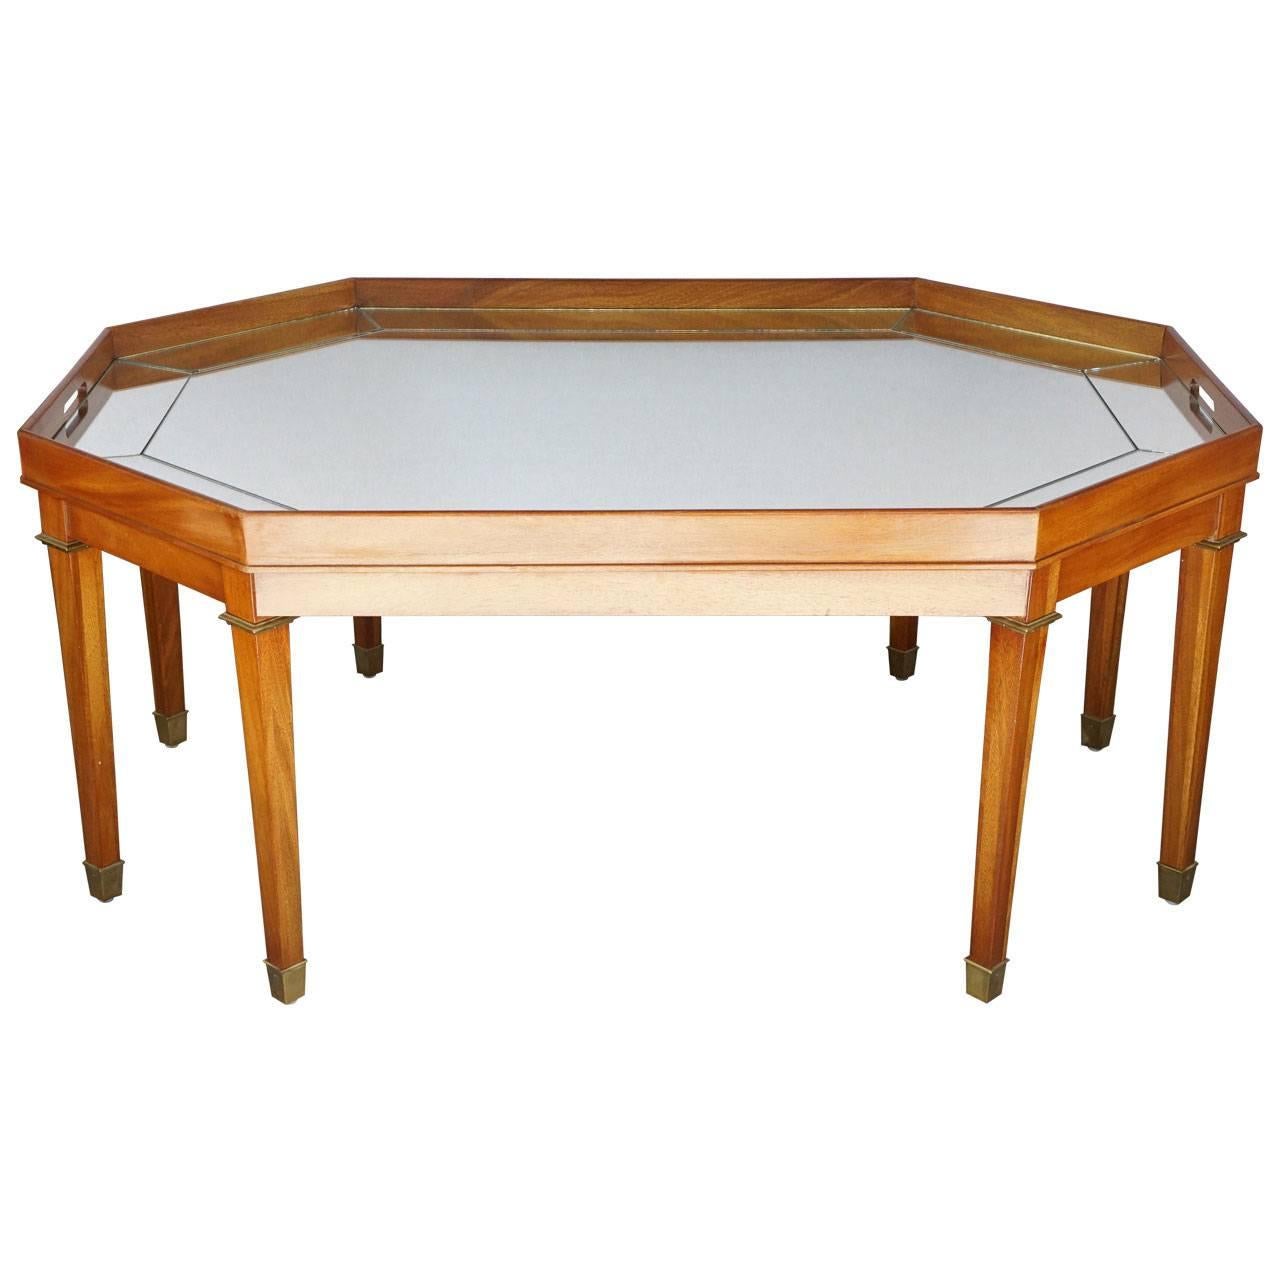  Vintage Blonde Mahogany and Mirror Topped Coffee Table by Ralph Lauren